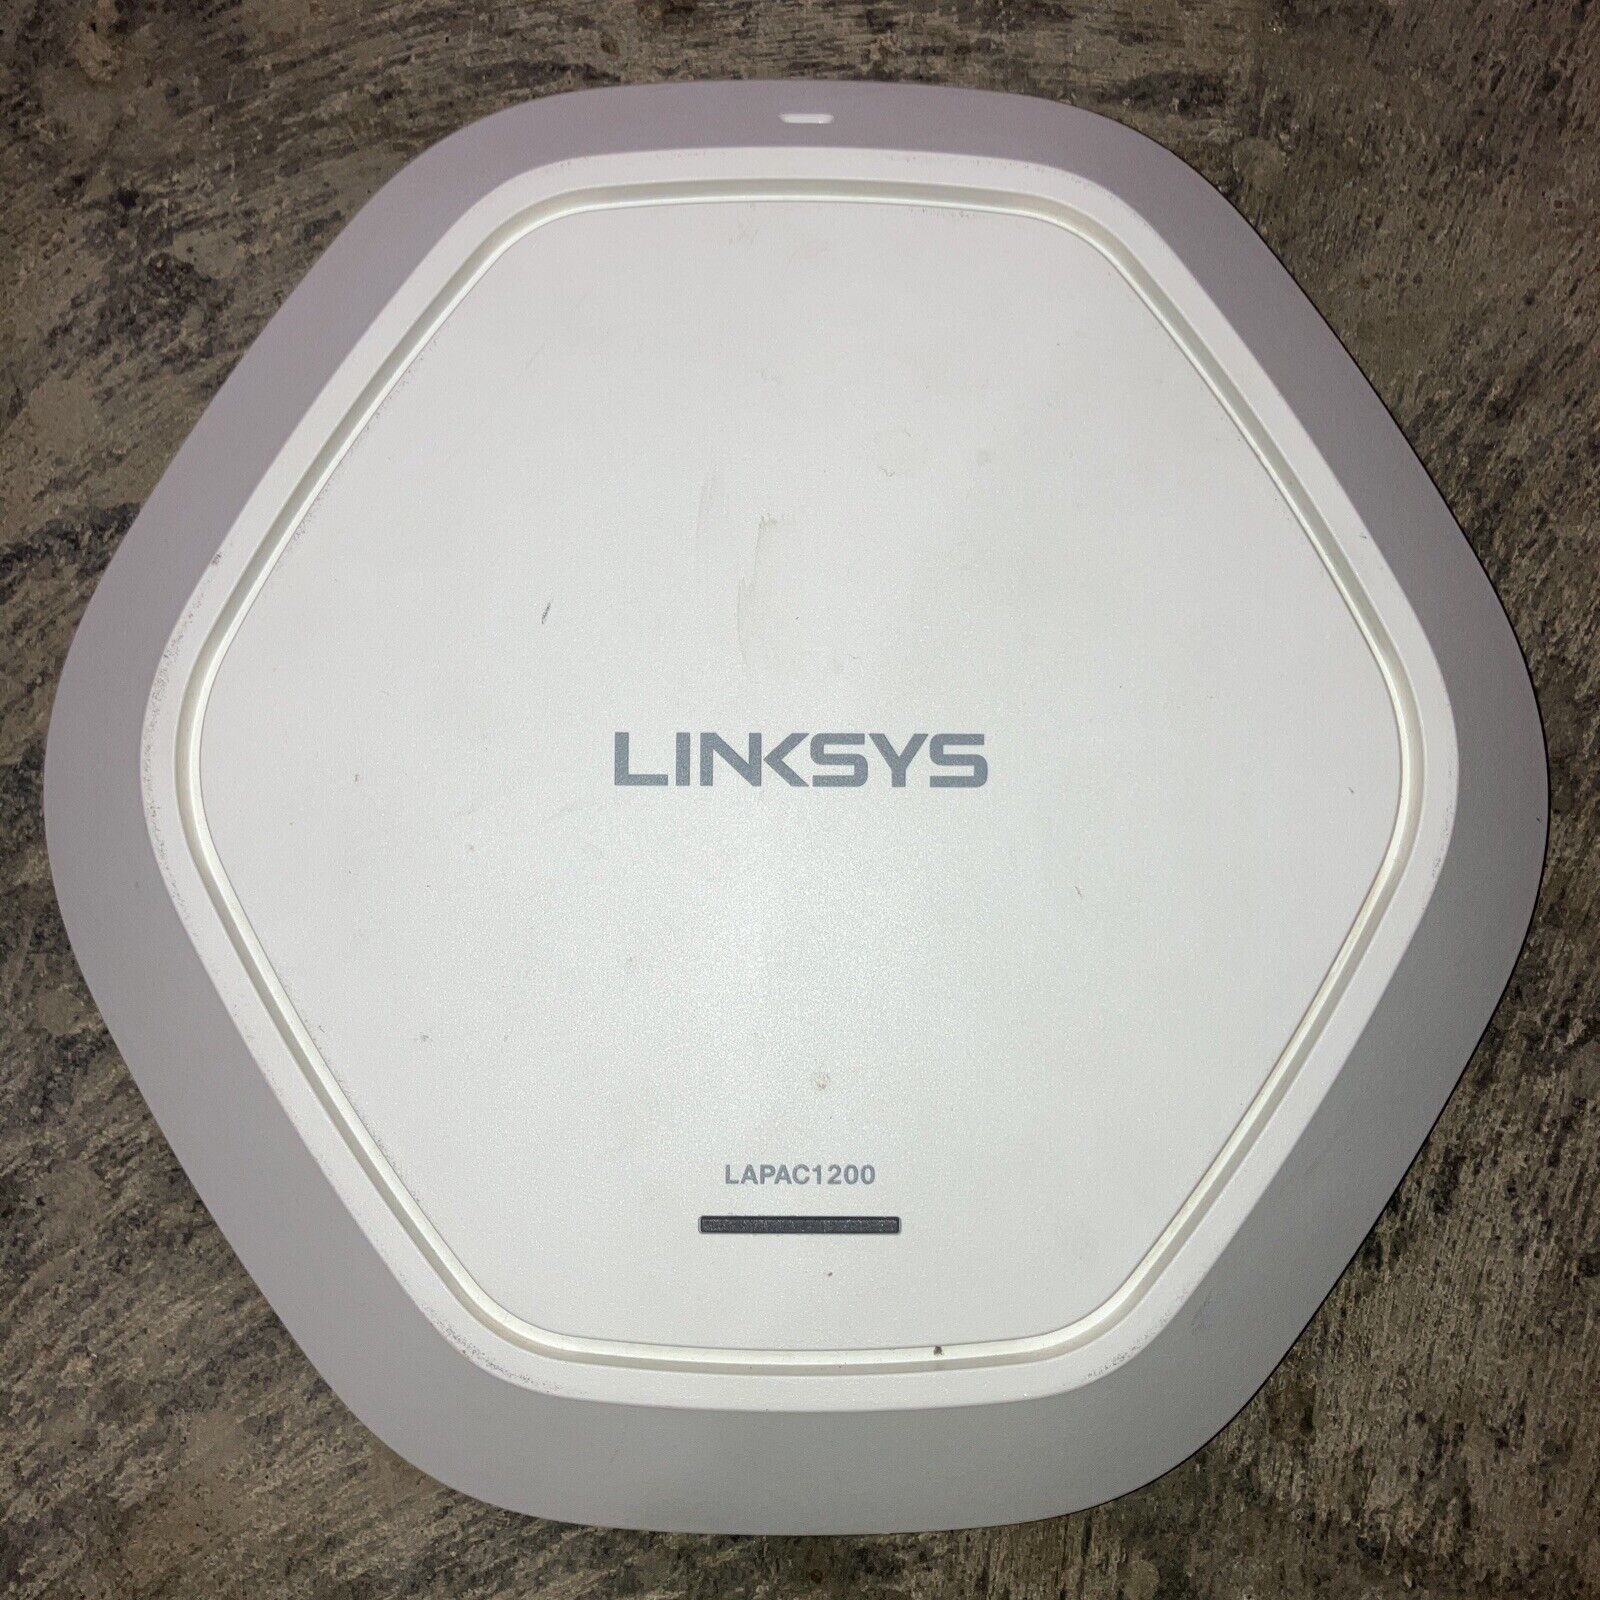 Linksys Business LAPAC1200 AC1200 Wireless Access Point Dual-Band PoE TESTED